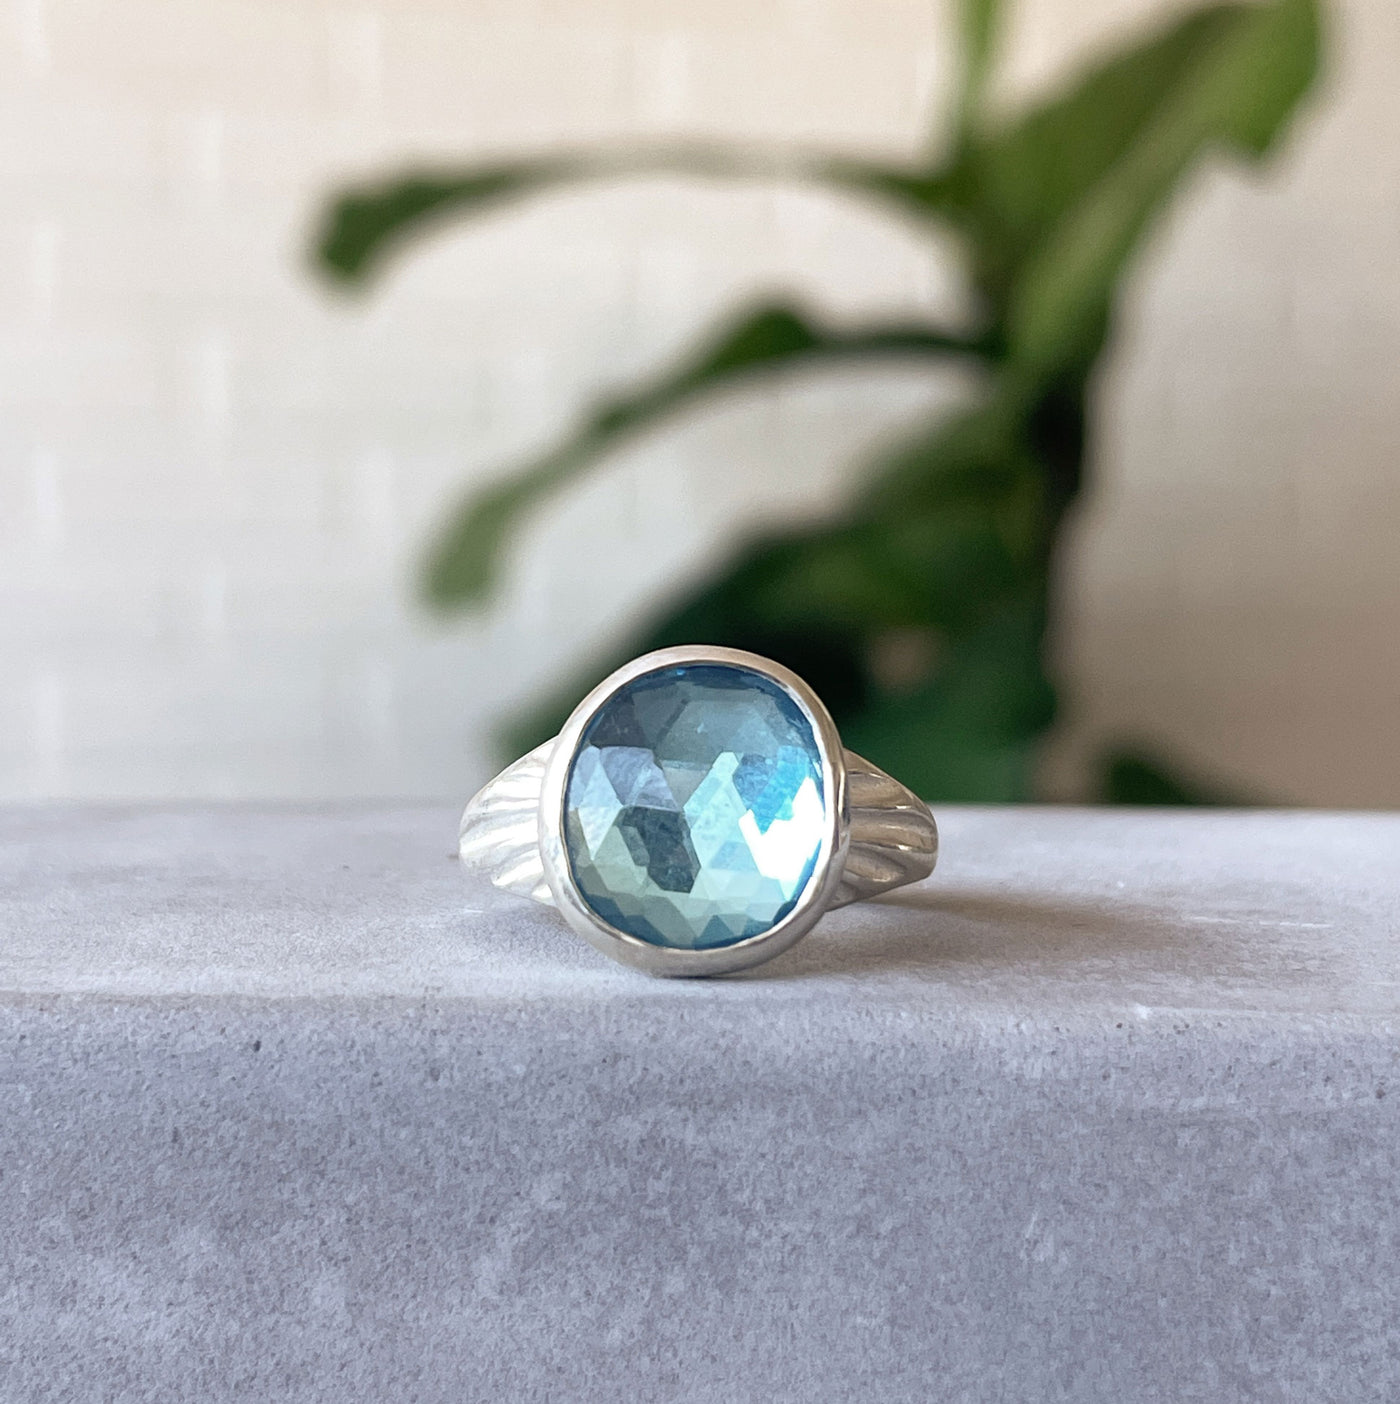 Swiss Blue Topaz Calista Ring in Sterling Silver #1 on a concrete table, front angle